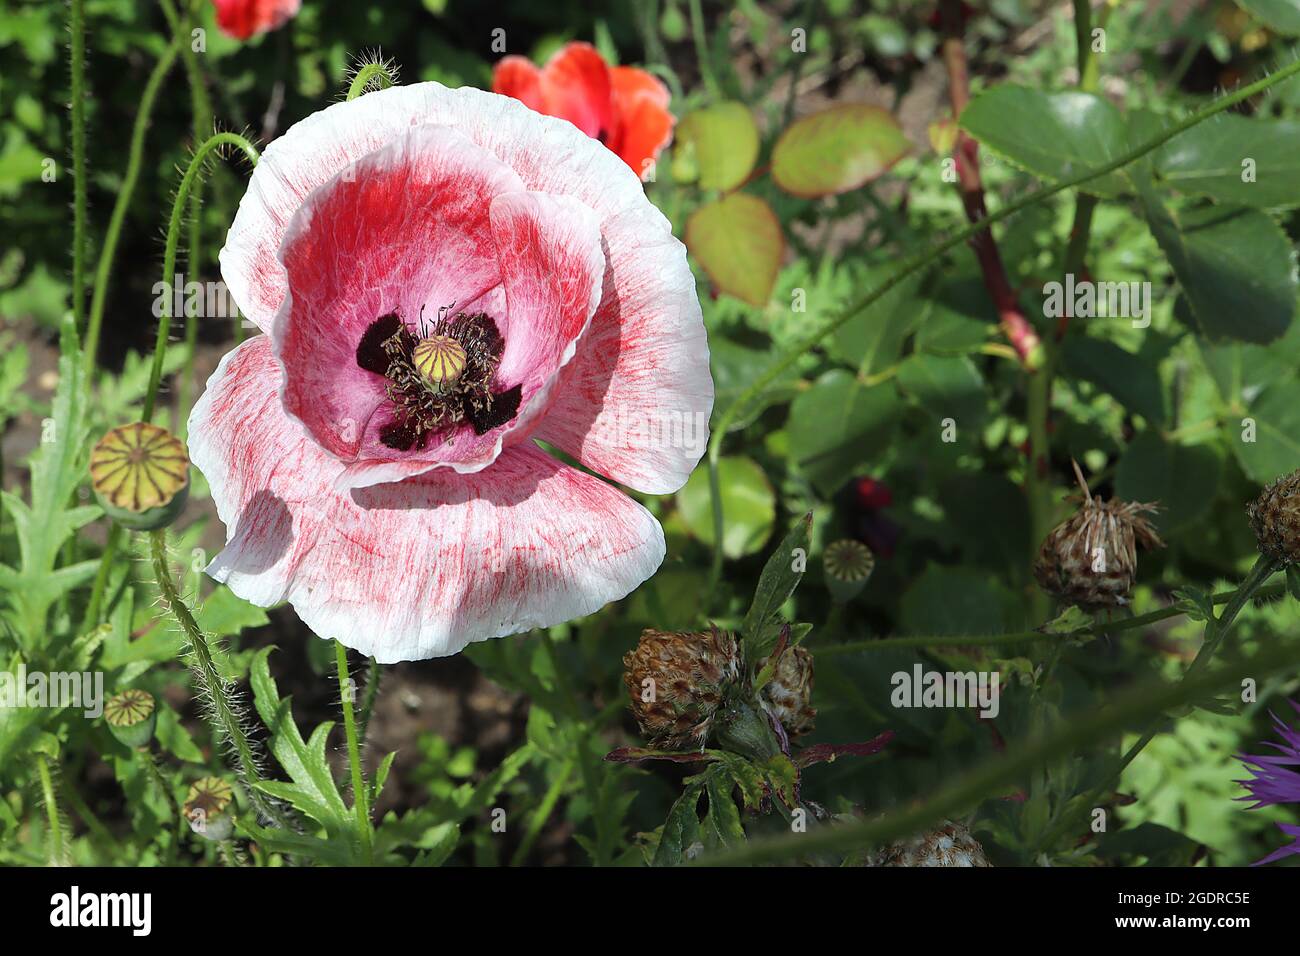 Papaver rhoeas Shirley Double Mixed corn poppy ‘Shirley Double Mixed’ – mottled red pink and white flowers with creased petals,  July, England, UK Stock Photo